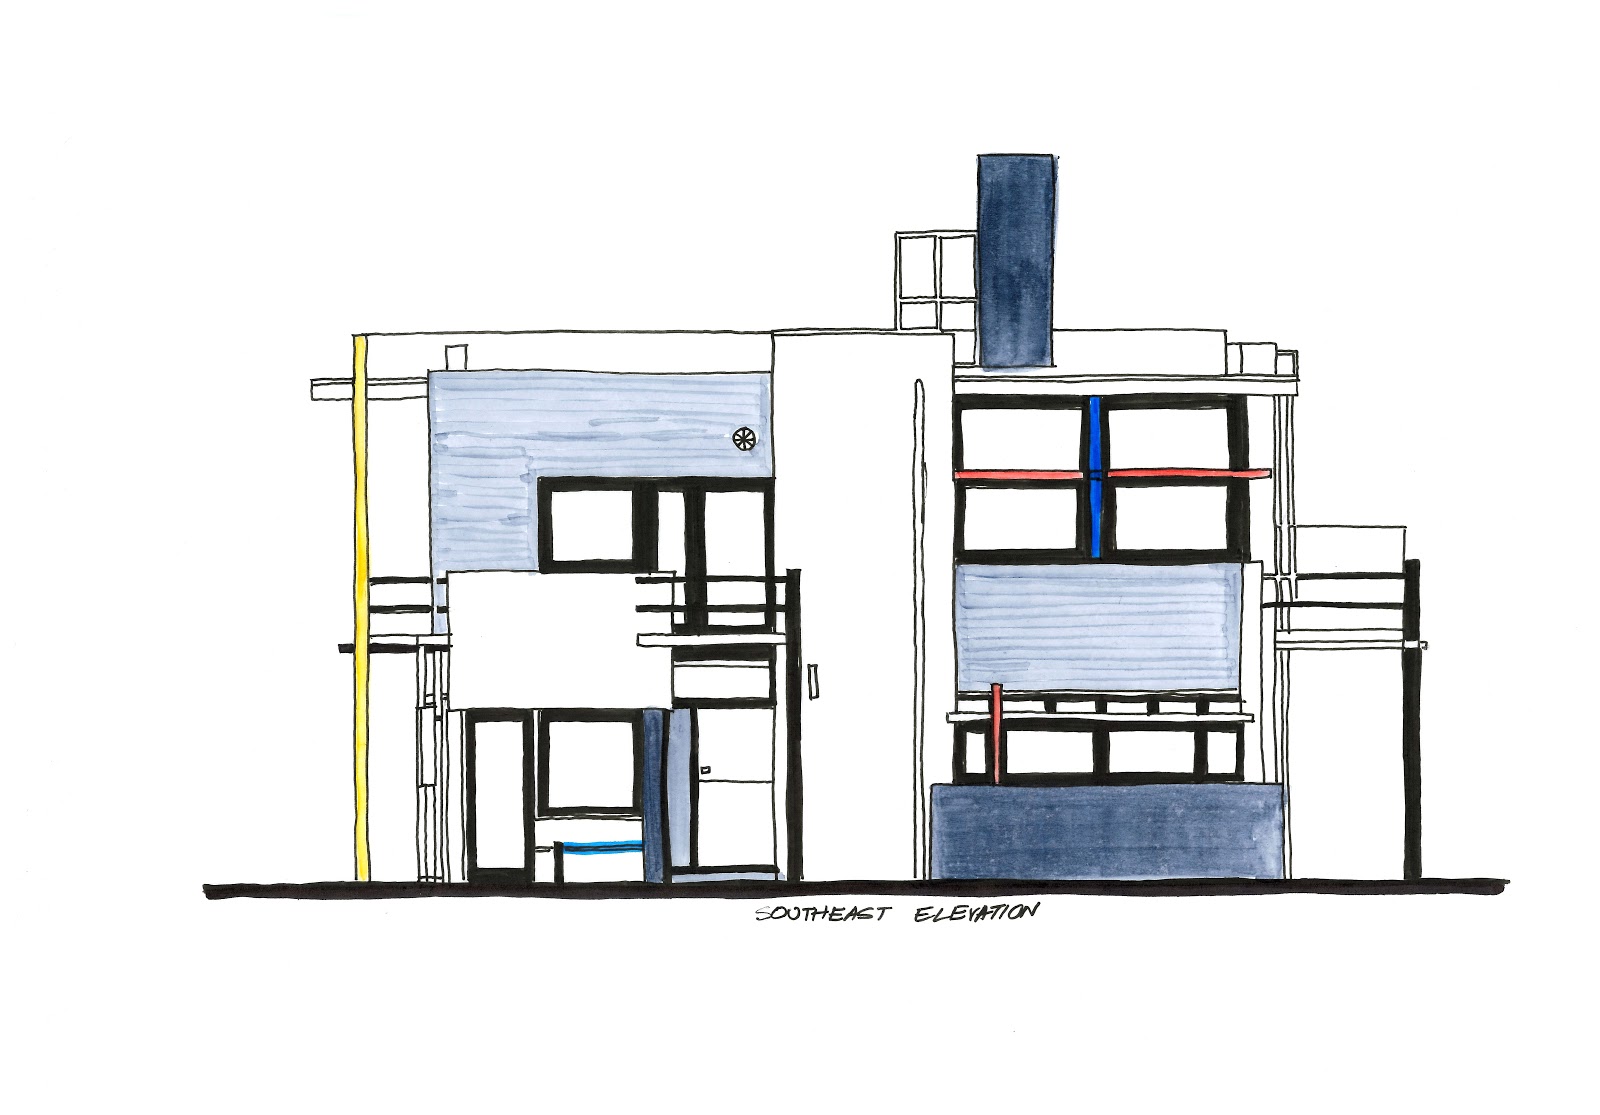 THE RIETVELD SCHRODER HOUSE DIAGRAMS AN IN DEPTH 